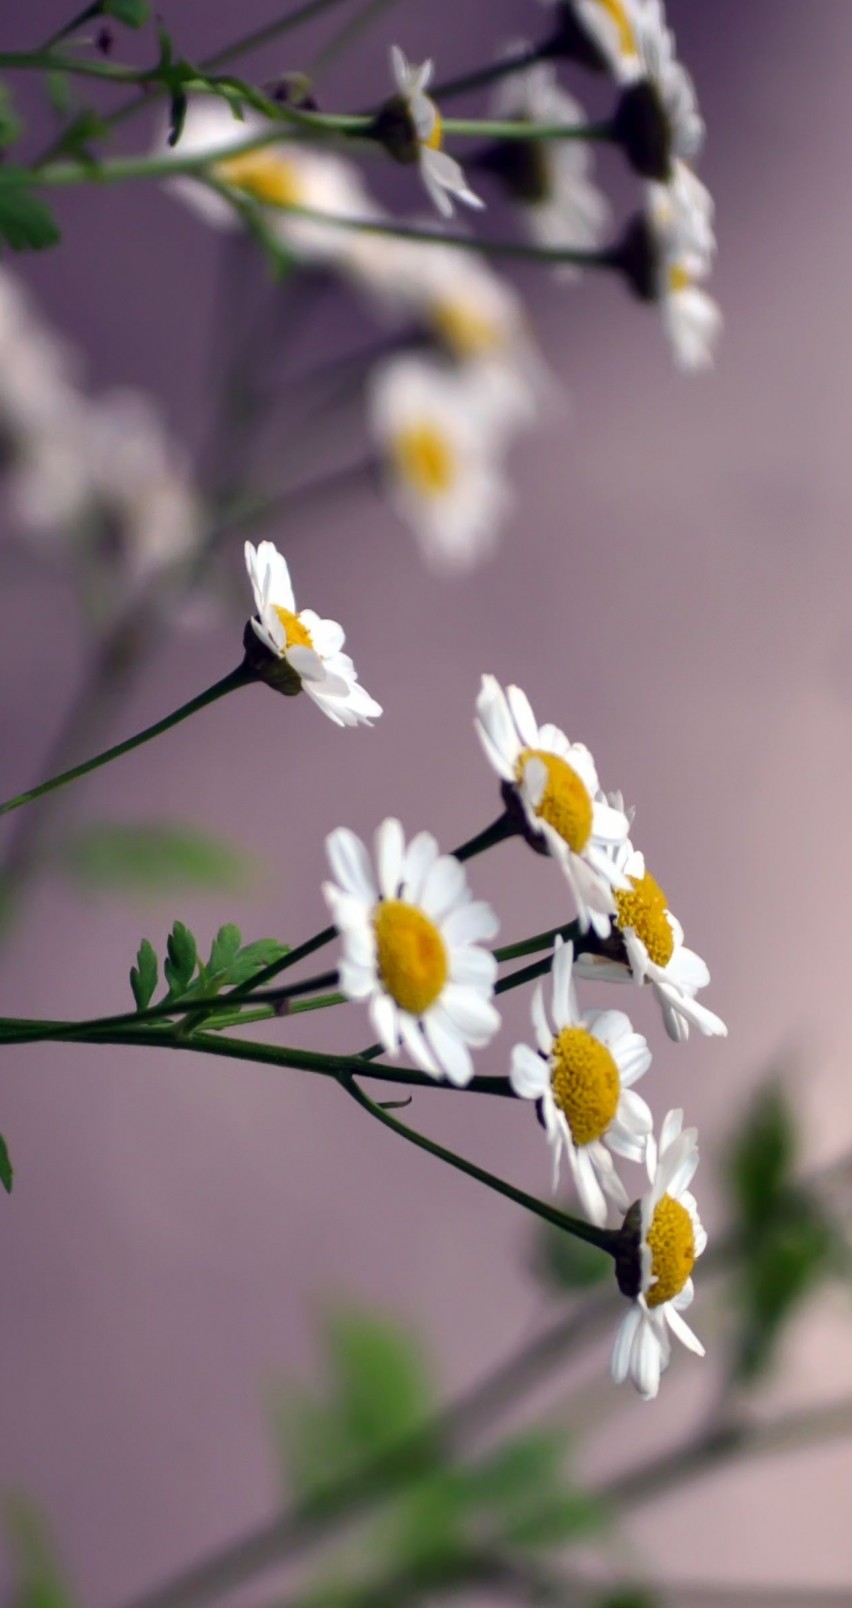 Daisy Flowers Wallpaper for Apple iPhone 6 / 6s